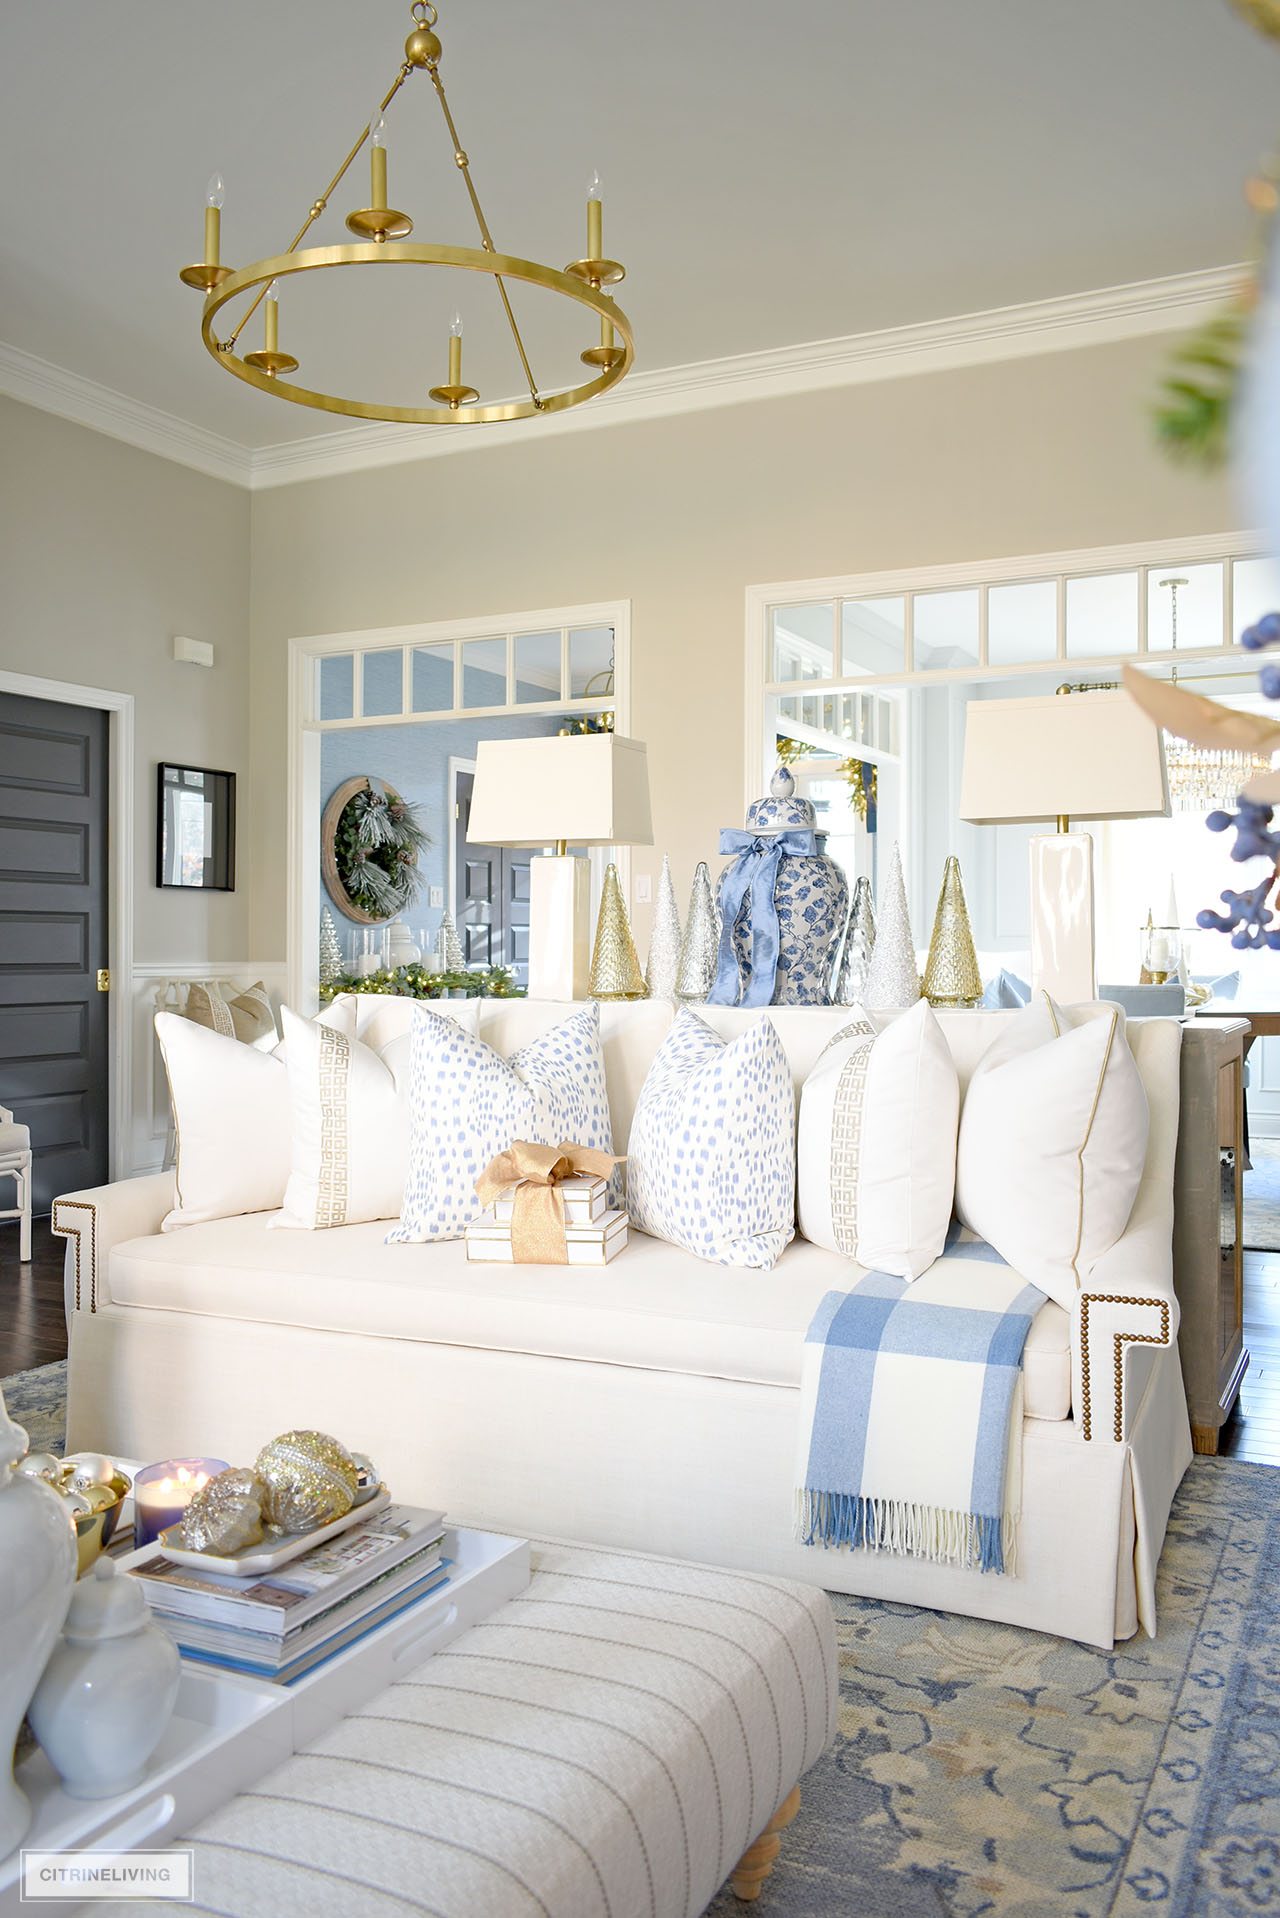 White sofa with designer pillows in white, with gold trim, gold and white fretwork ribbon, and blue and white pillows in a subtle animal print.